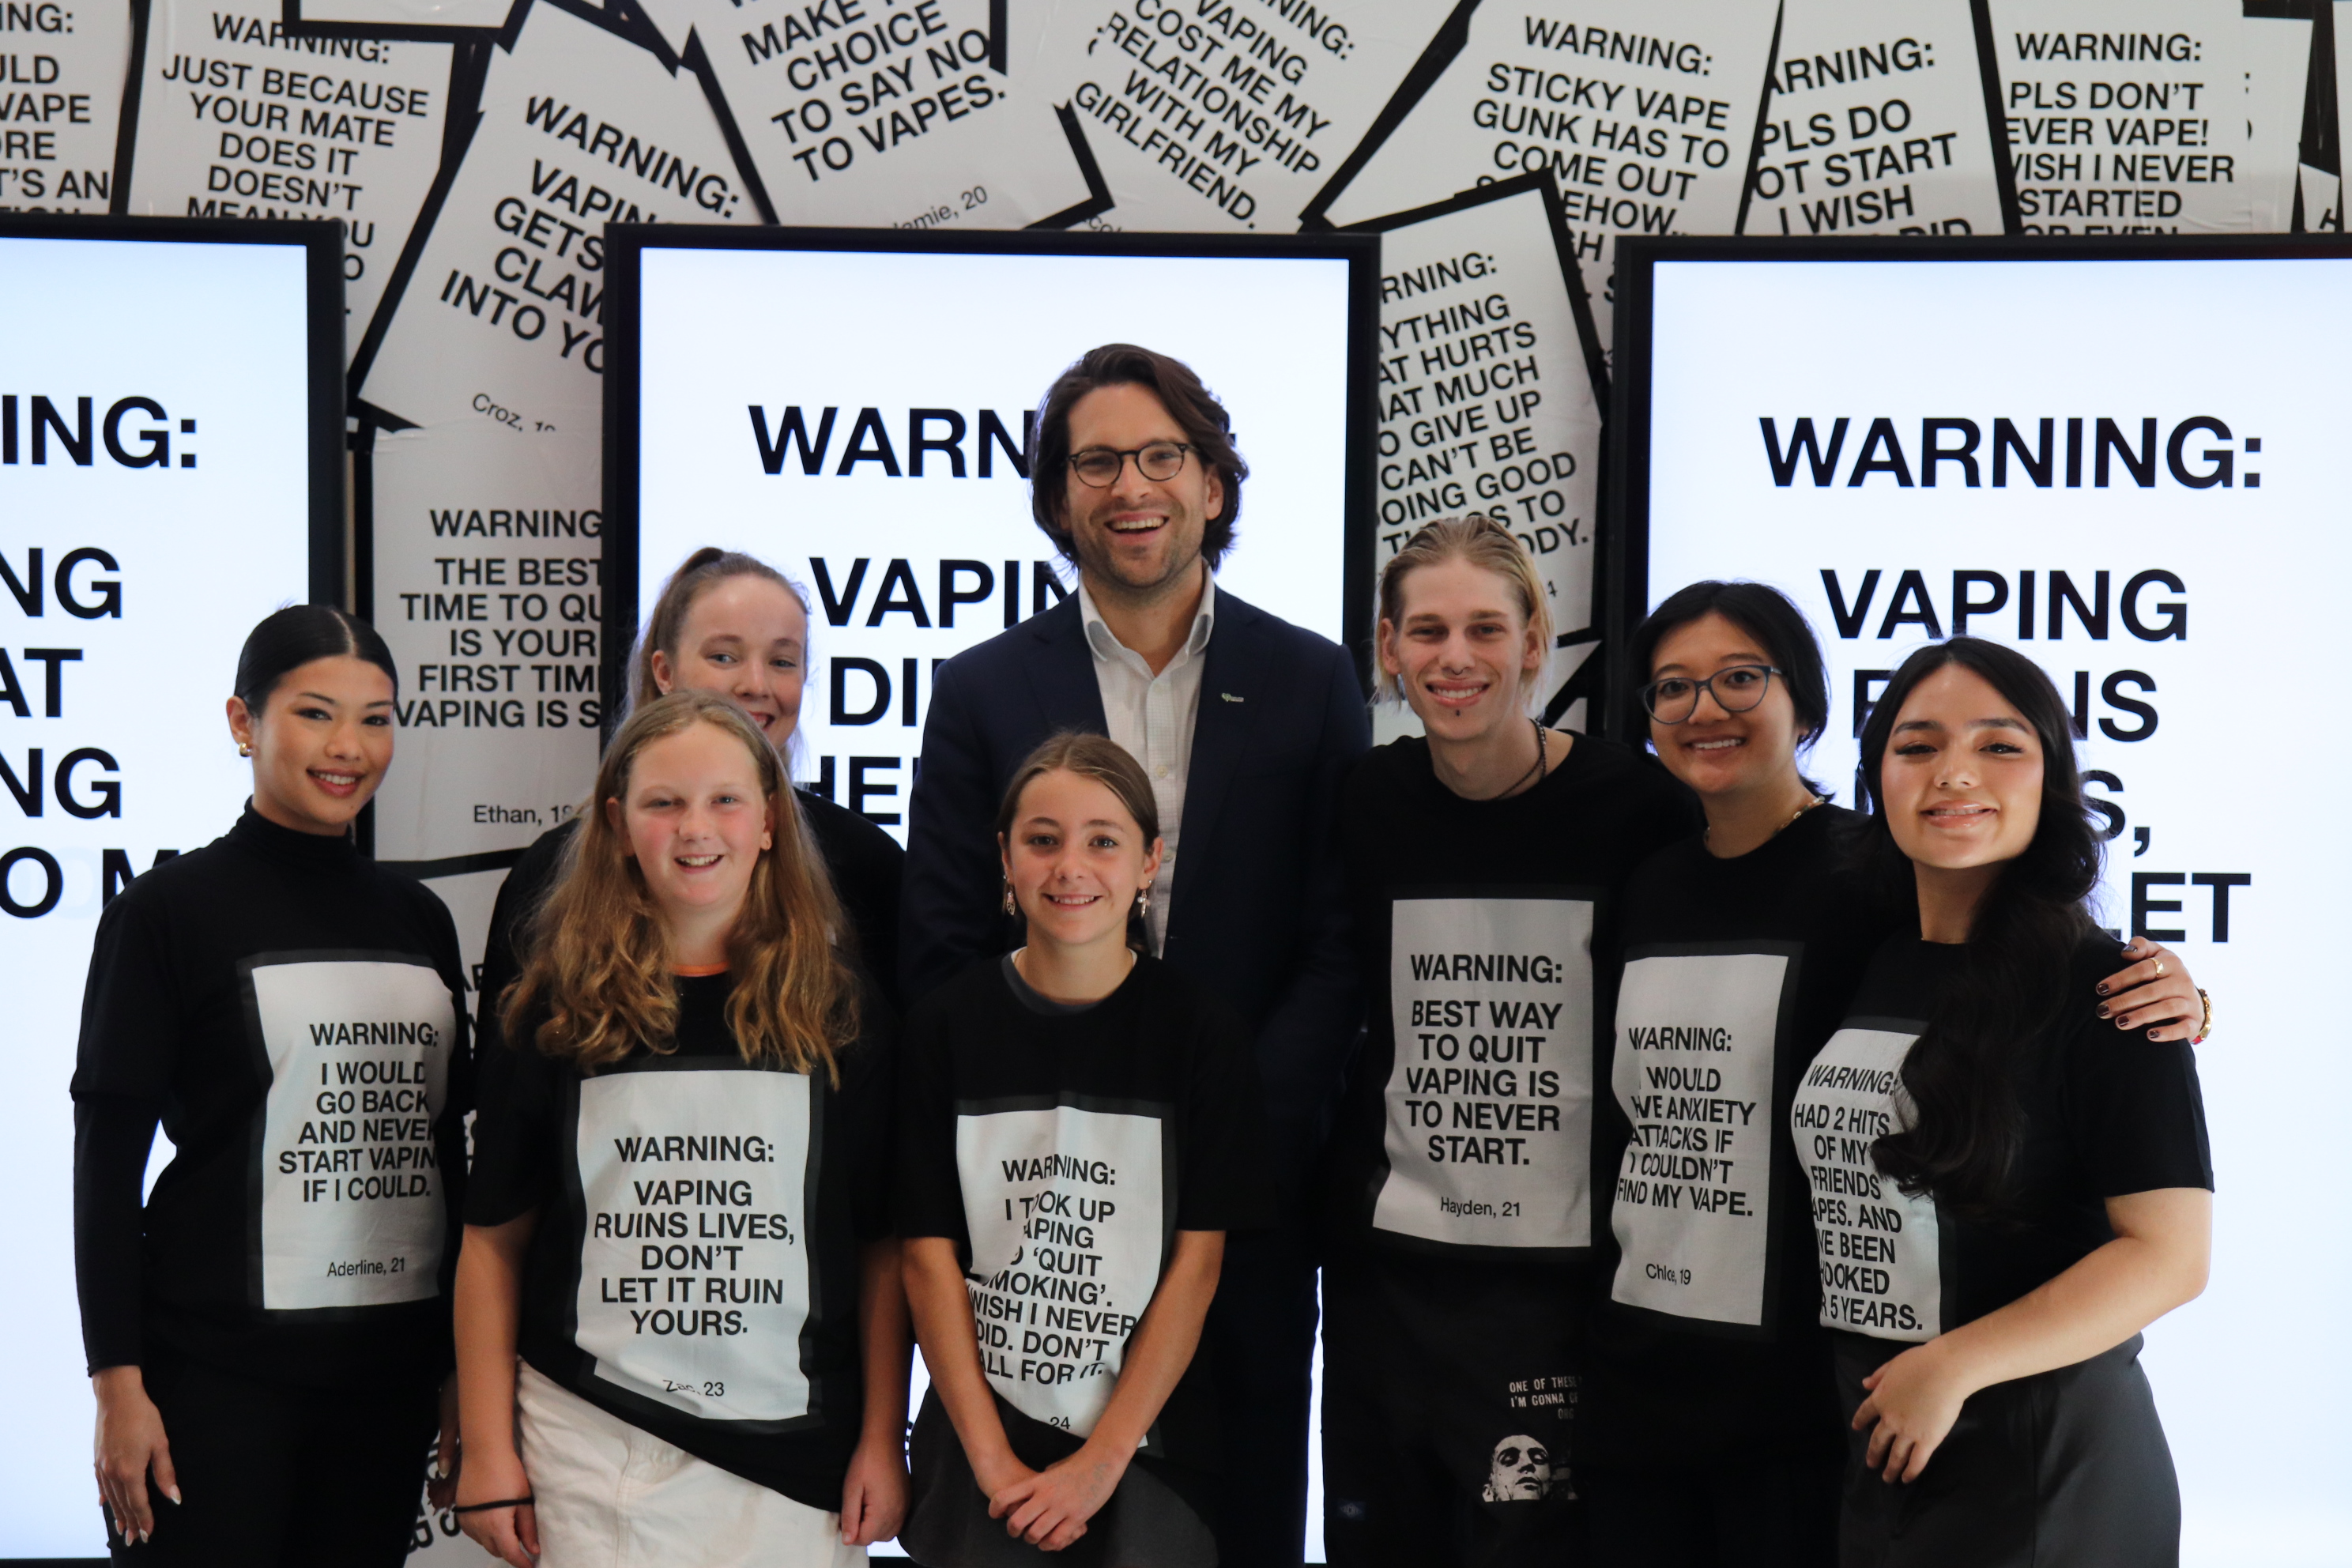 Young people who want to warn others about vaping pose for a photo with VicHealth CEO Dr Sandro Demaio